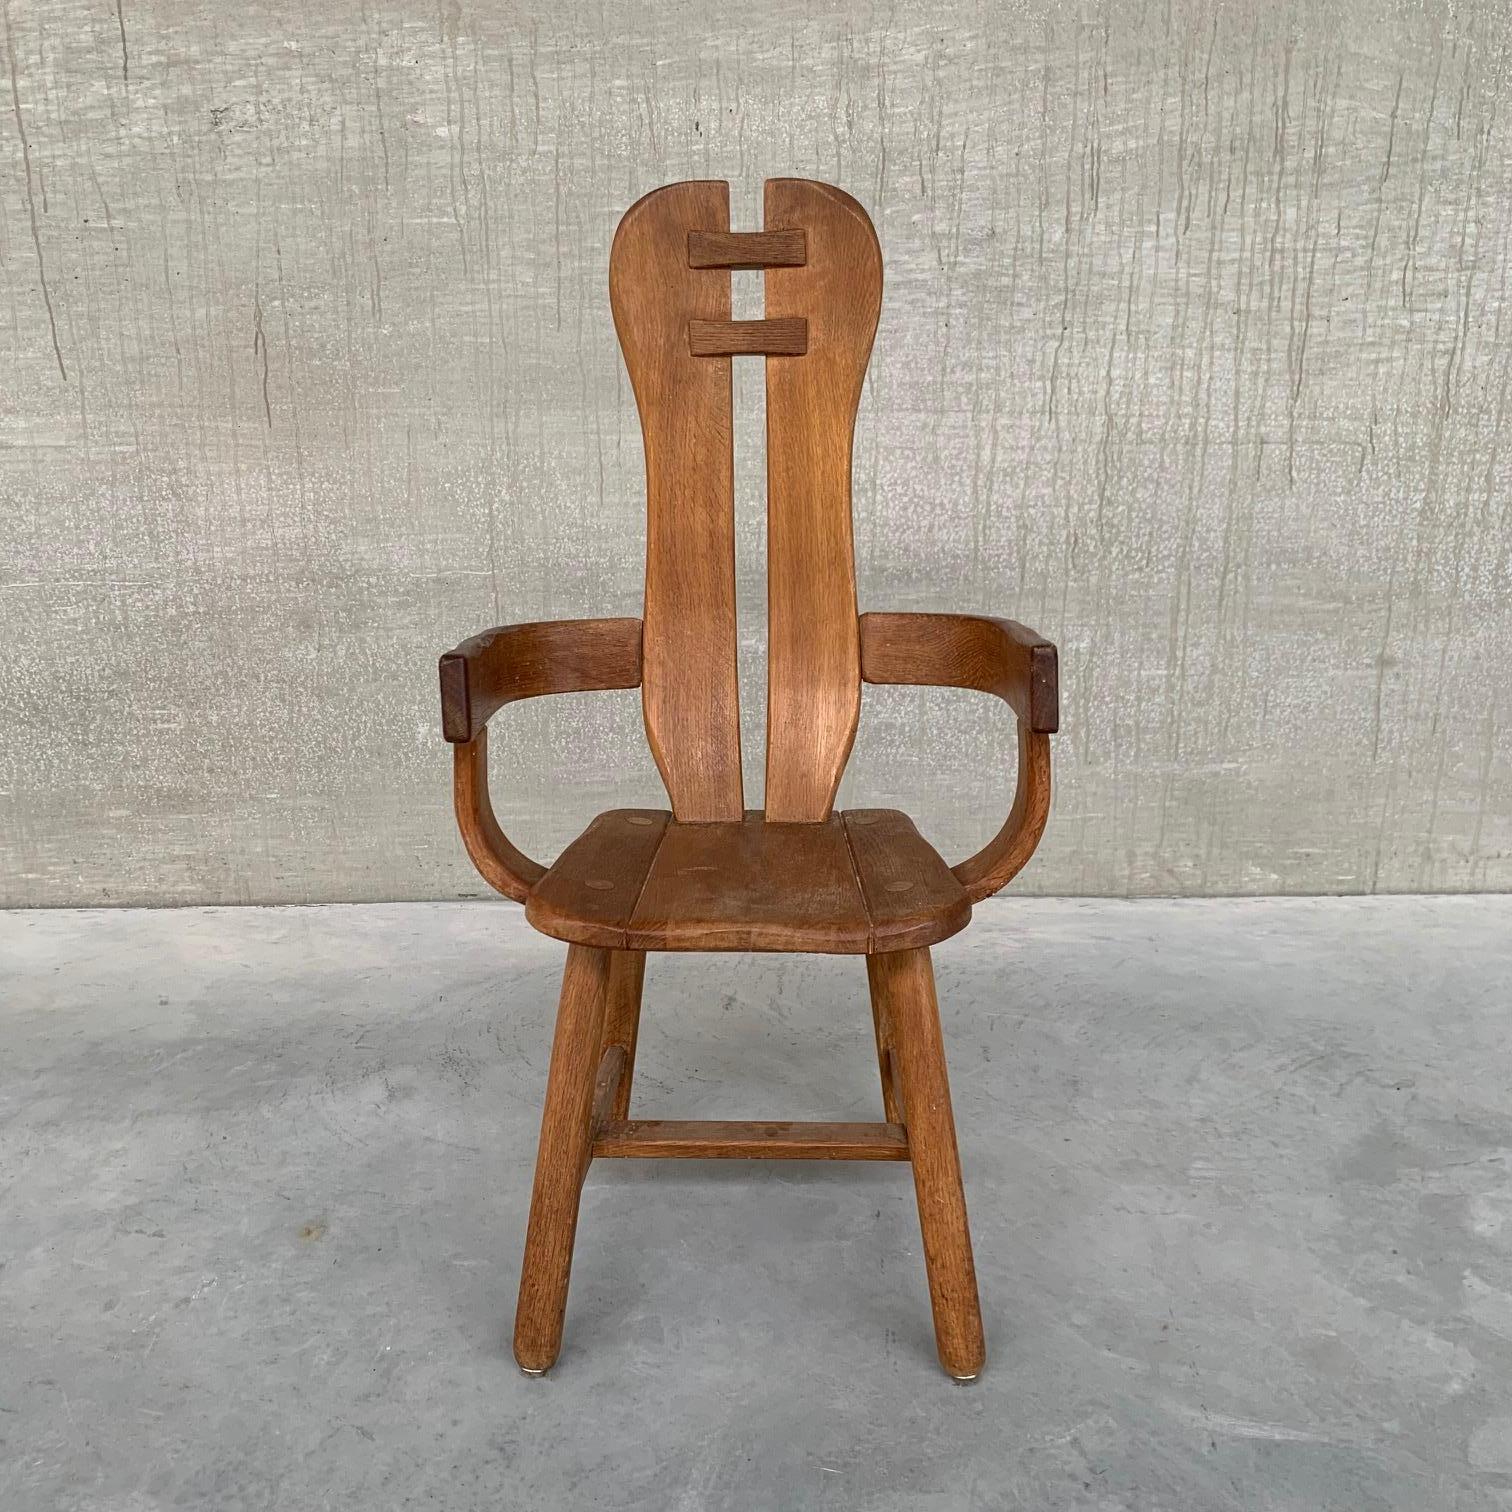 Oak dining or armchairs by De Puydt.

Belgium, c1970s.

A flexible chair that can be used in the dining room, living room or bedroom
as an occasional chair.

Some wear commensurate with age.

Priced and sold individually.

Location: Belgium